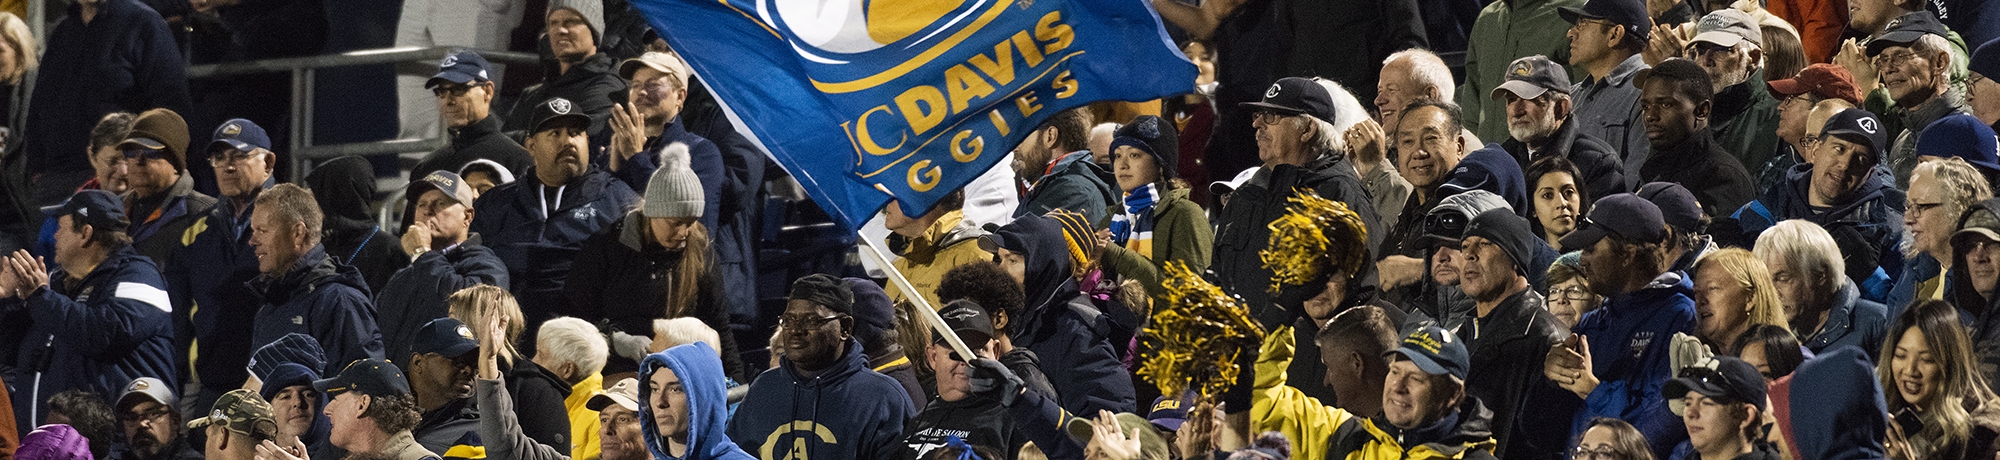 Crowd cheering in the stand with various yellow and blue accents and one sign that reads &#34;UC Davis Aggies&#34;.